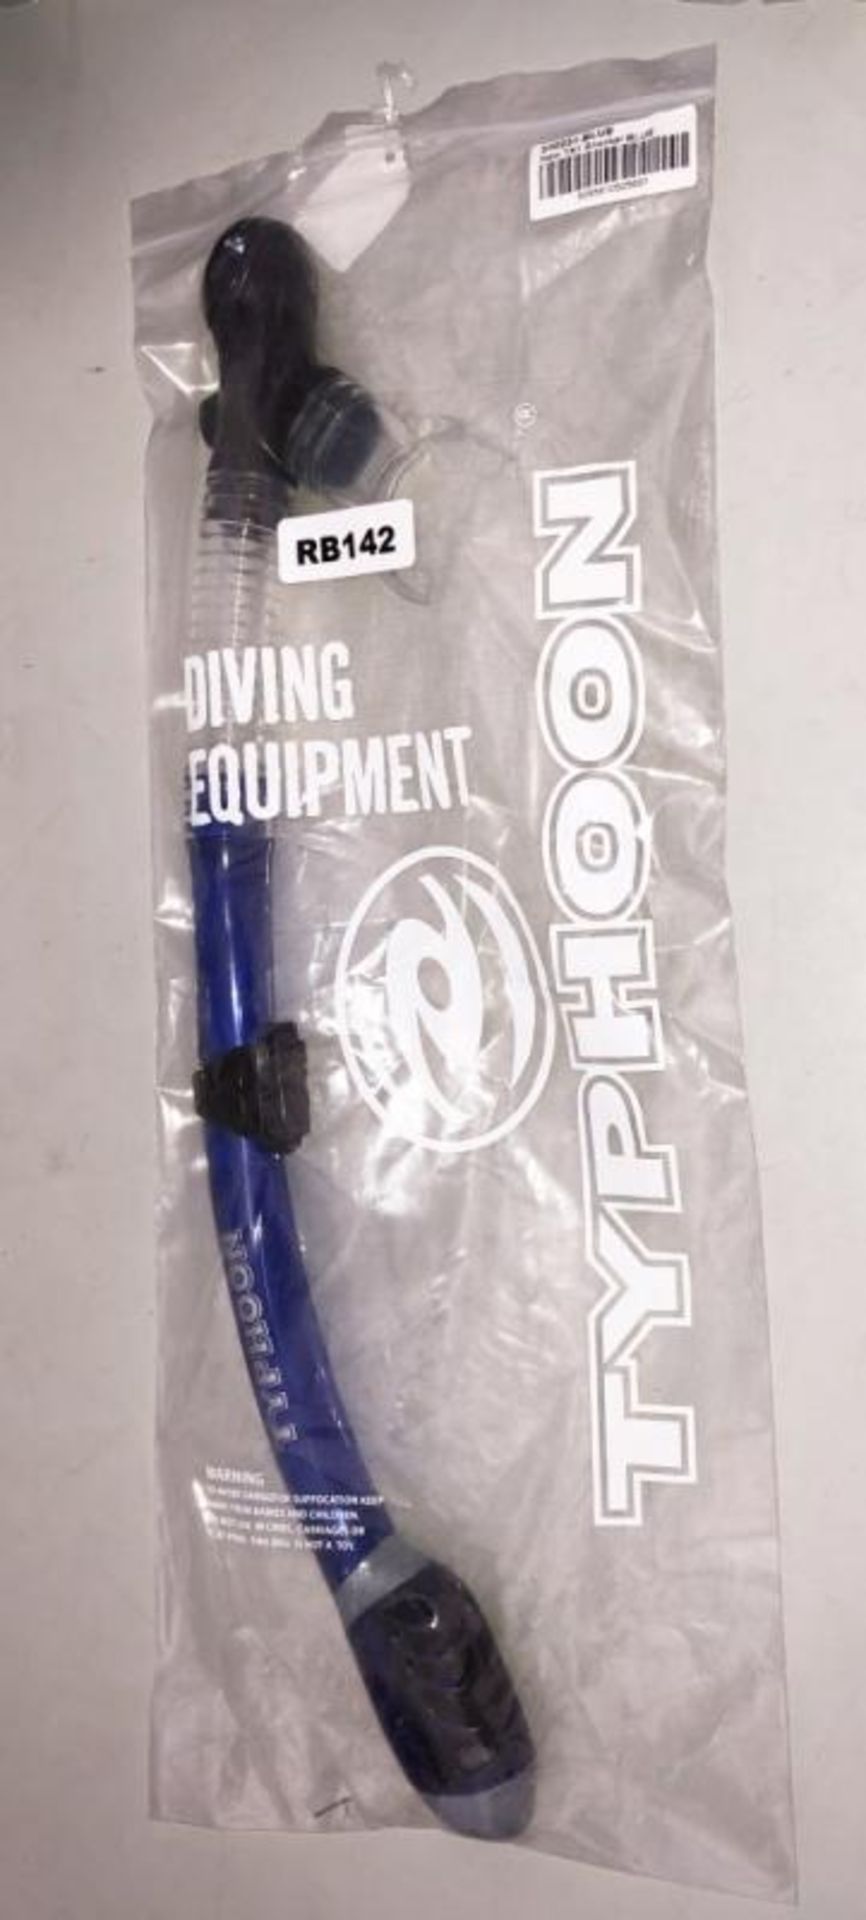 34 x Branded Diving Snorkel's - CL349 - Altrincham WA14 - Brand New! - Image 13 of 30